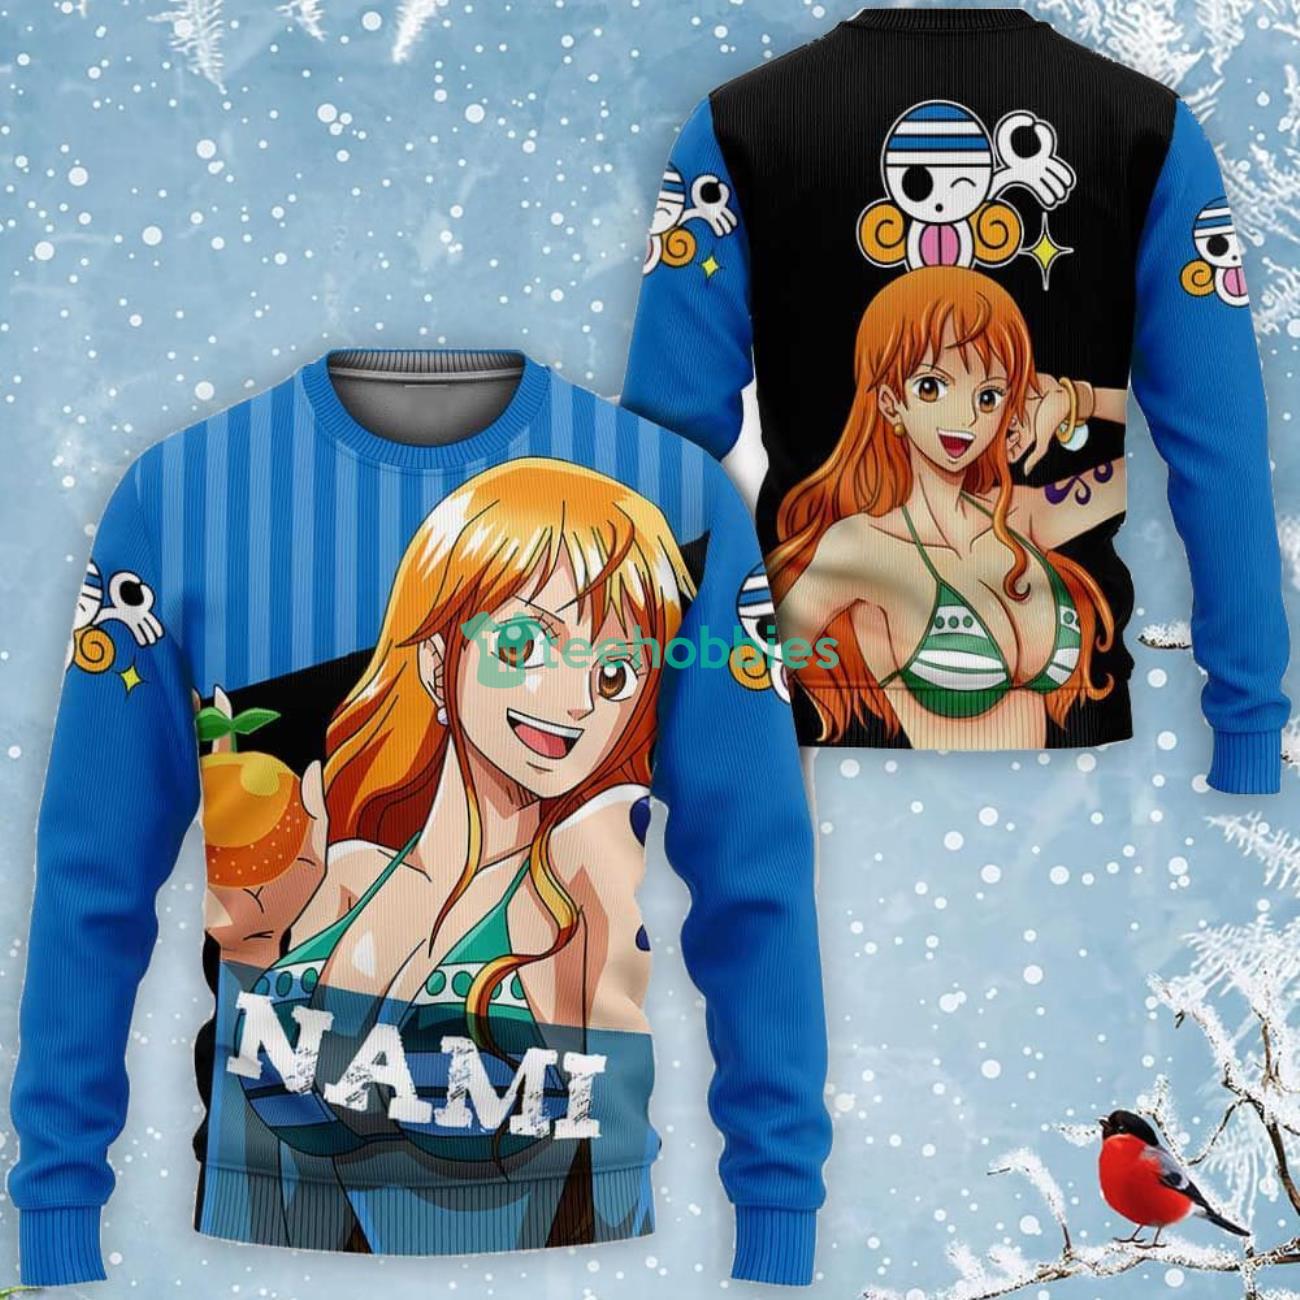 One piece of fandom — Quick thoughts about Nami's dress